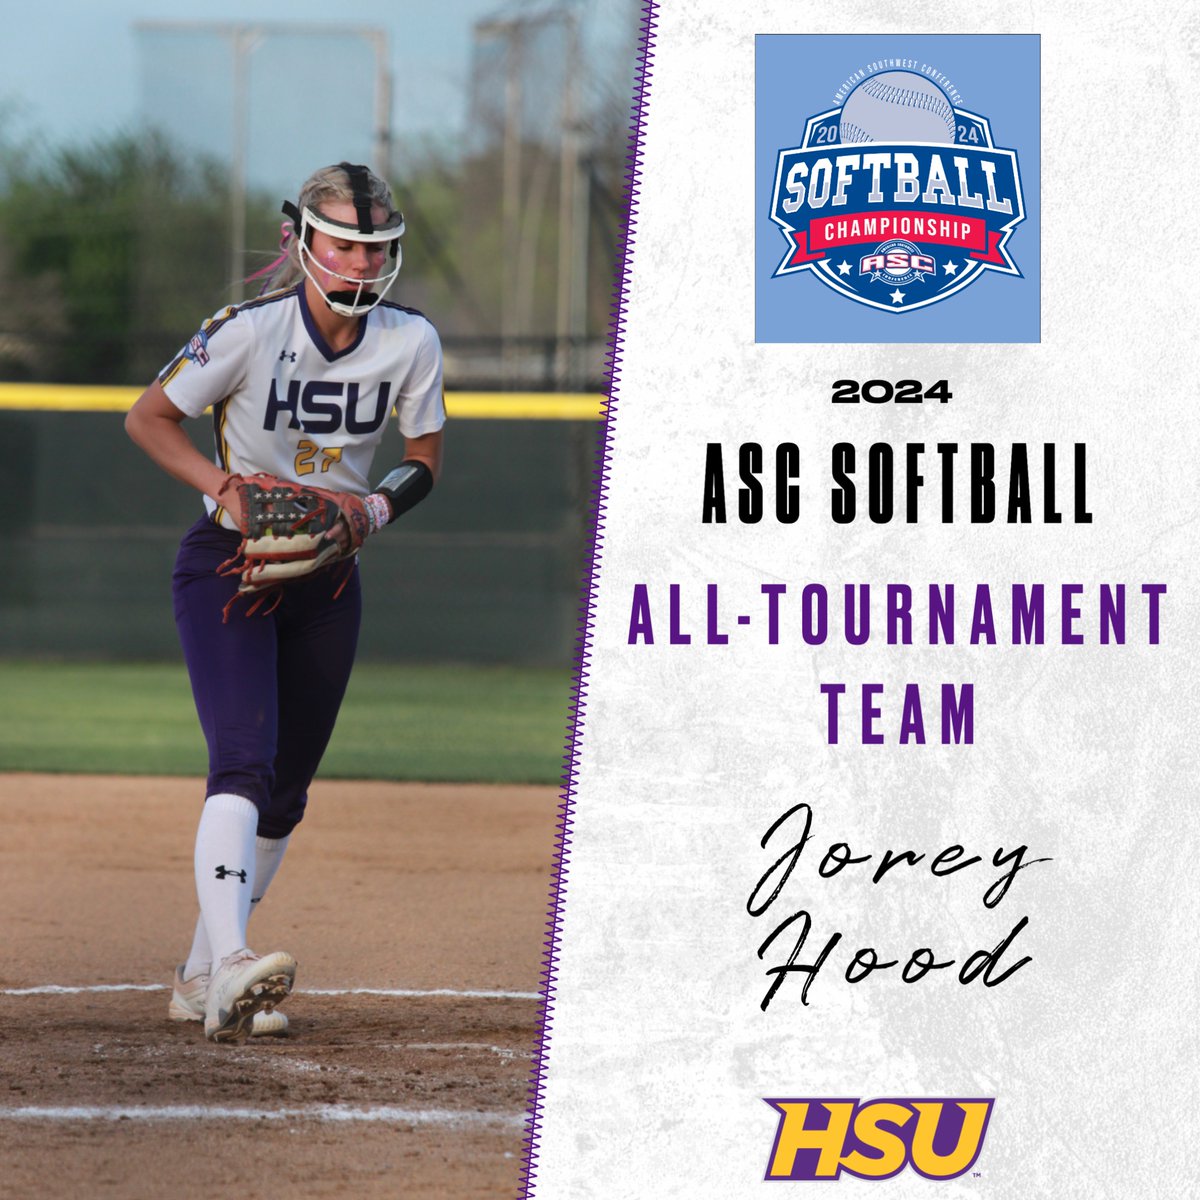 Congrats to Jorey Hood for being named to the ASC All-Tournament Team! 🤠